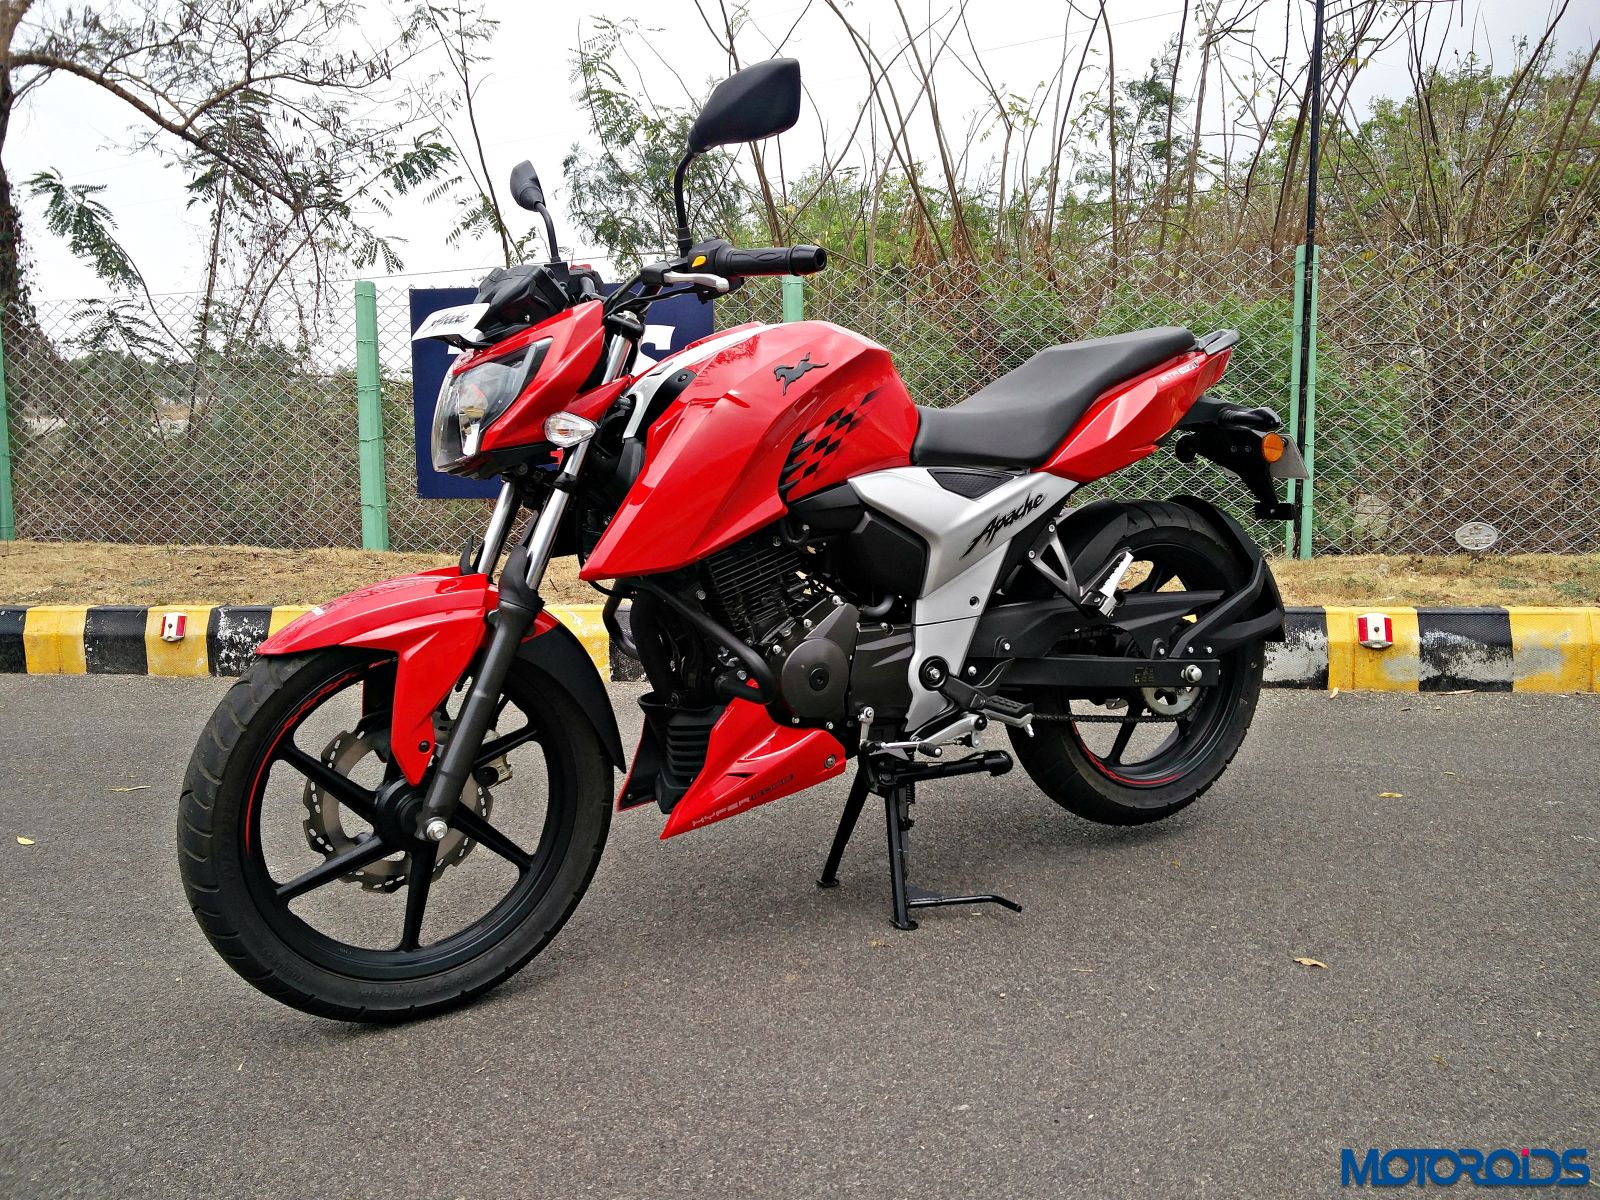 Tvs Apache Rtr 160 4v Launched In Bangladesh Motoroids